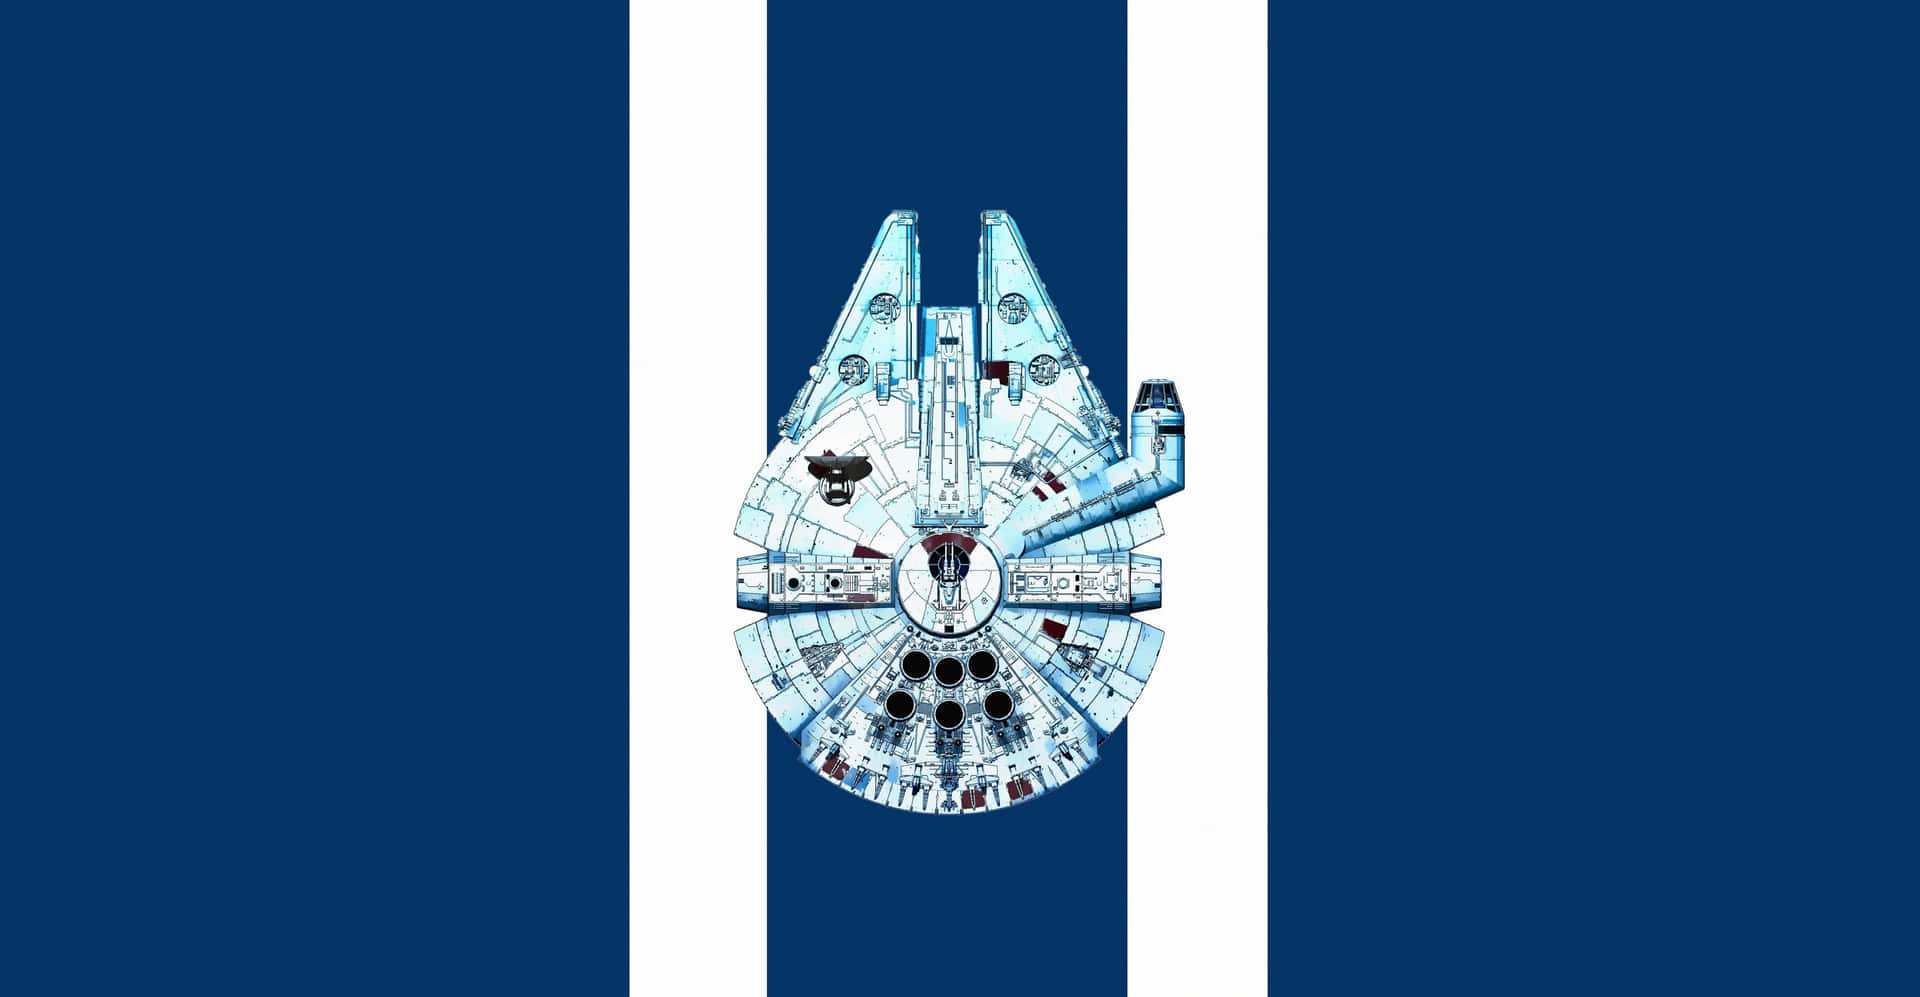 In a galaxy far, far away, the Millenium Falcon embarks on its epic journey. Wallpaper